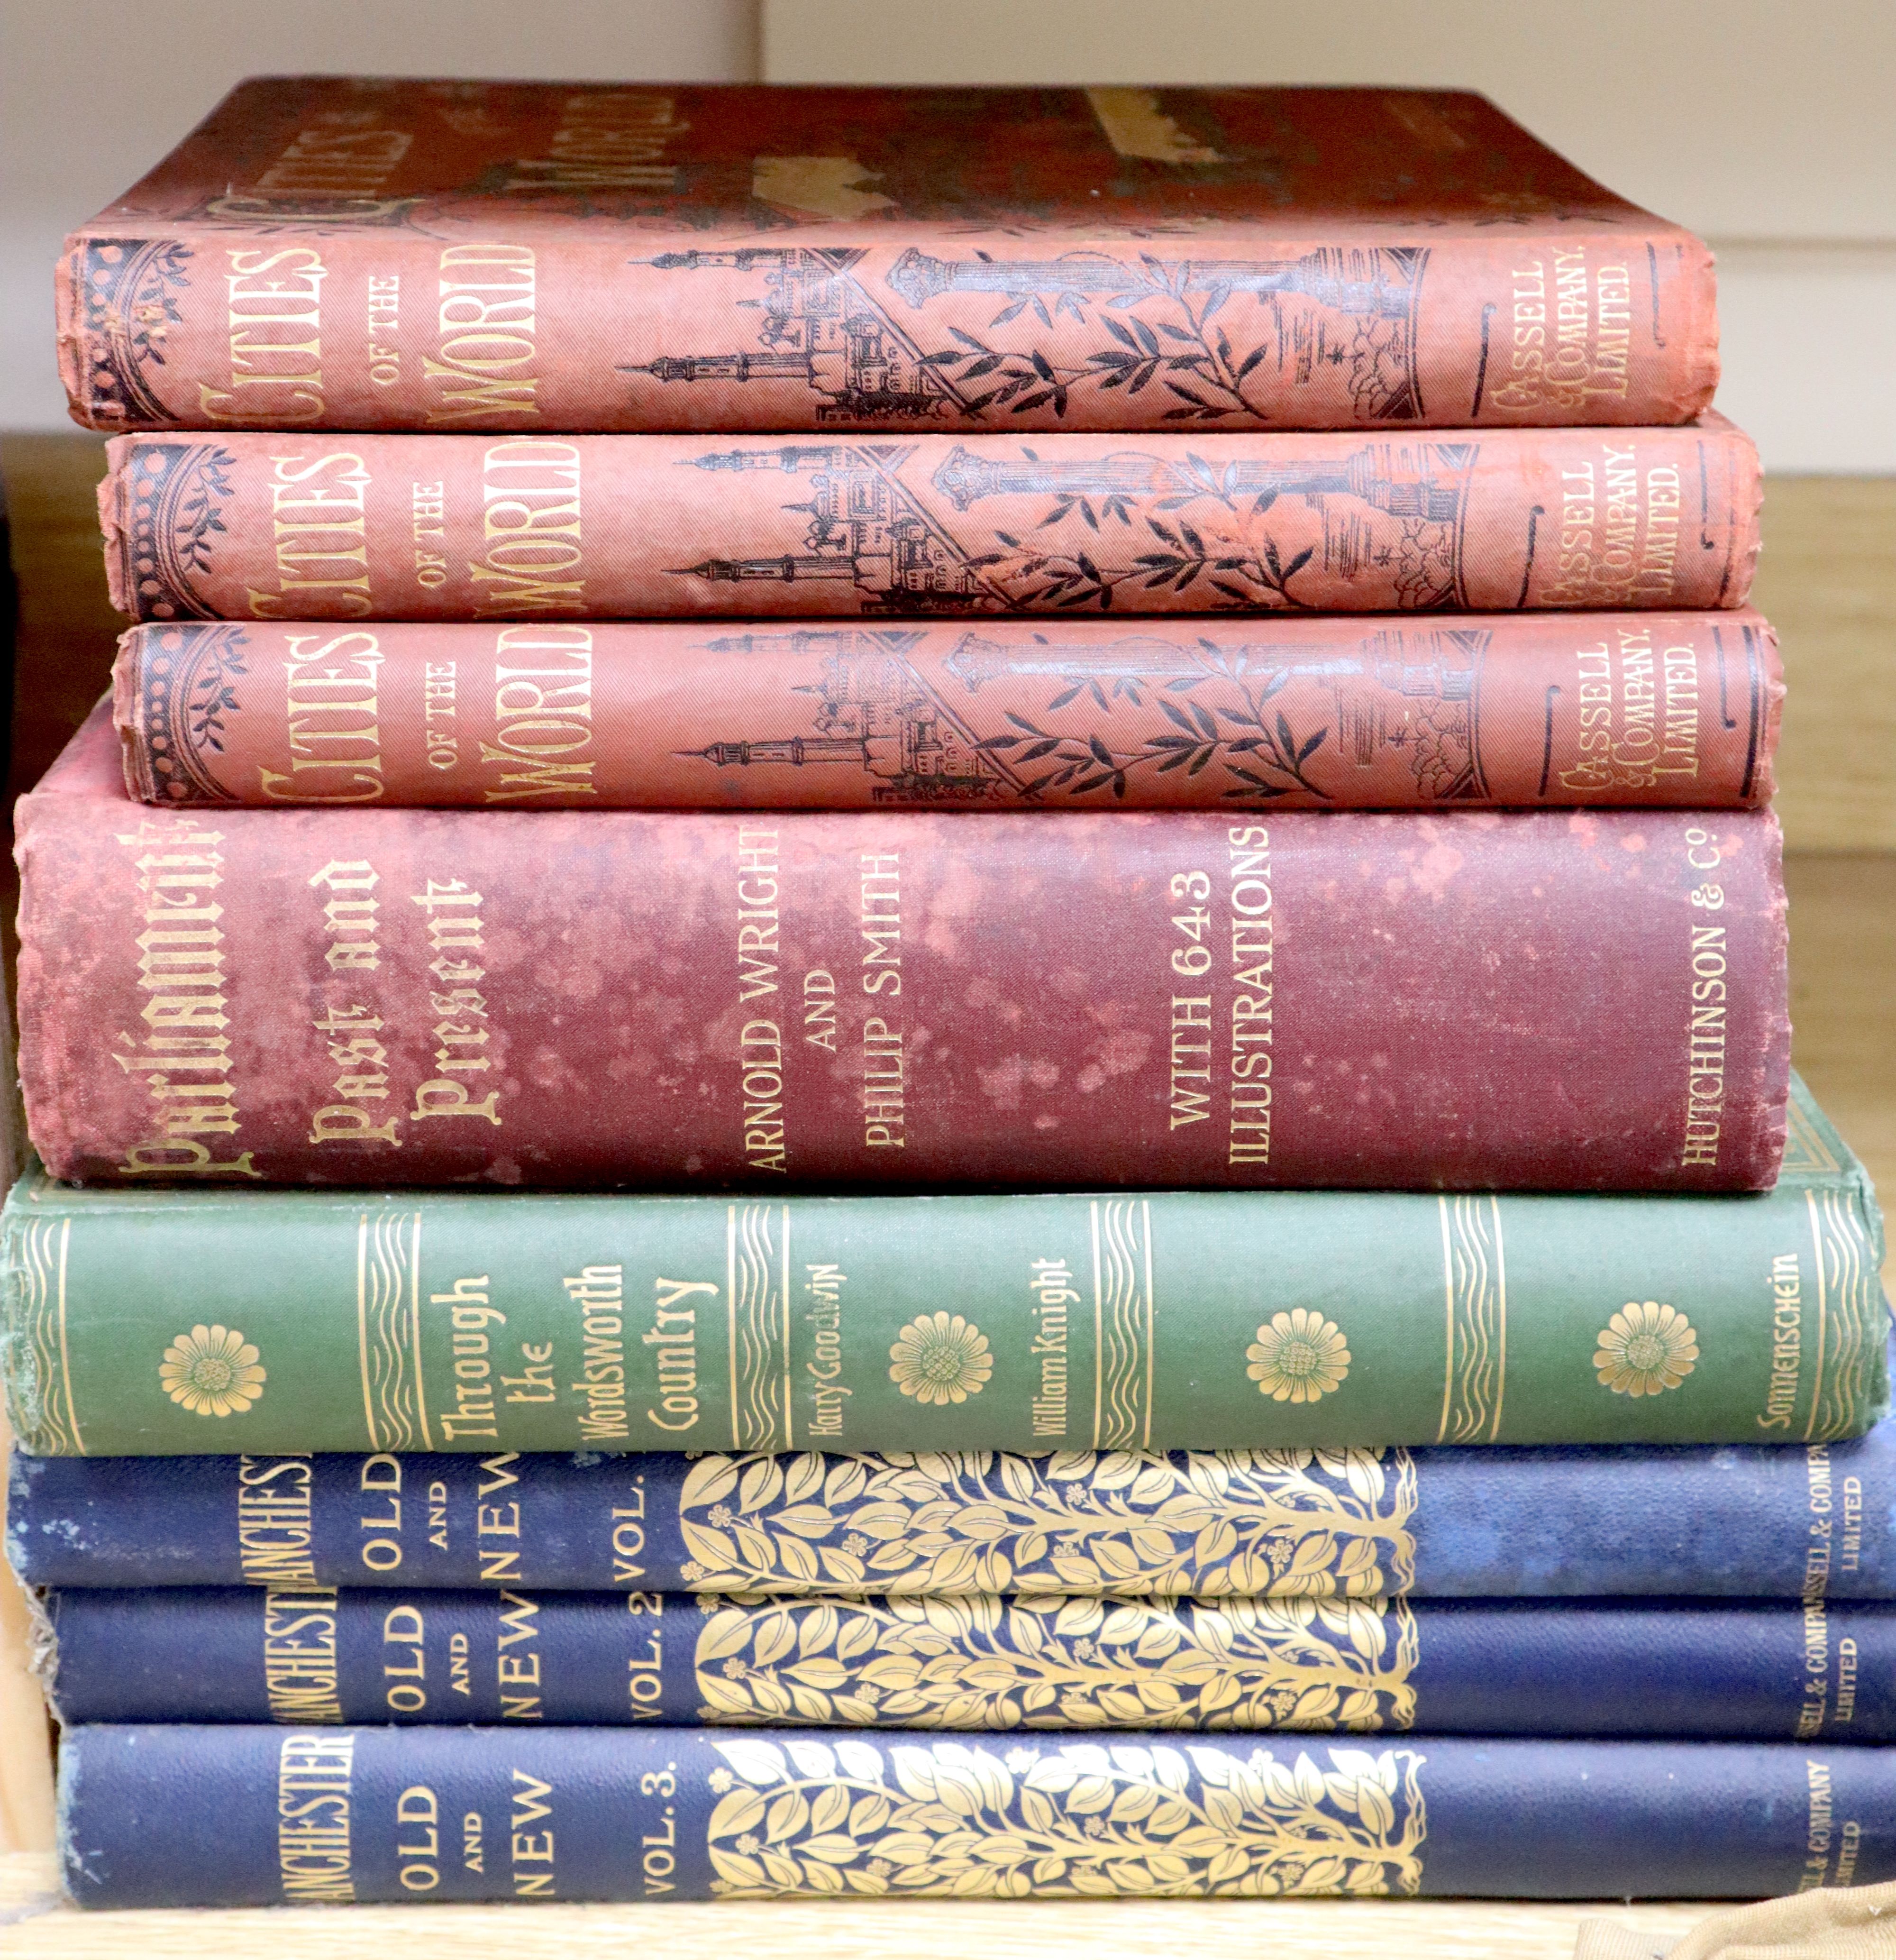 Books: Manchester Old and New, in three cloth and gilt volumes and five related books